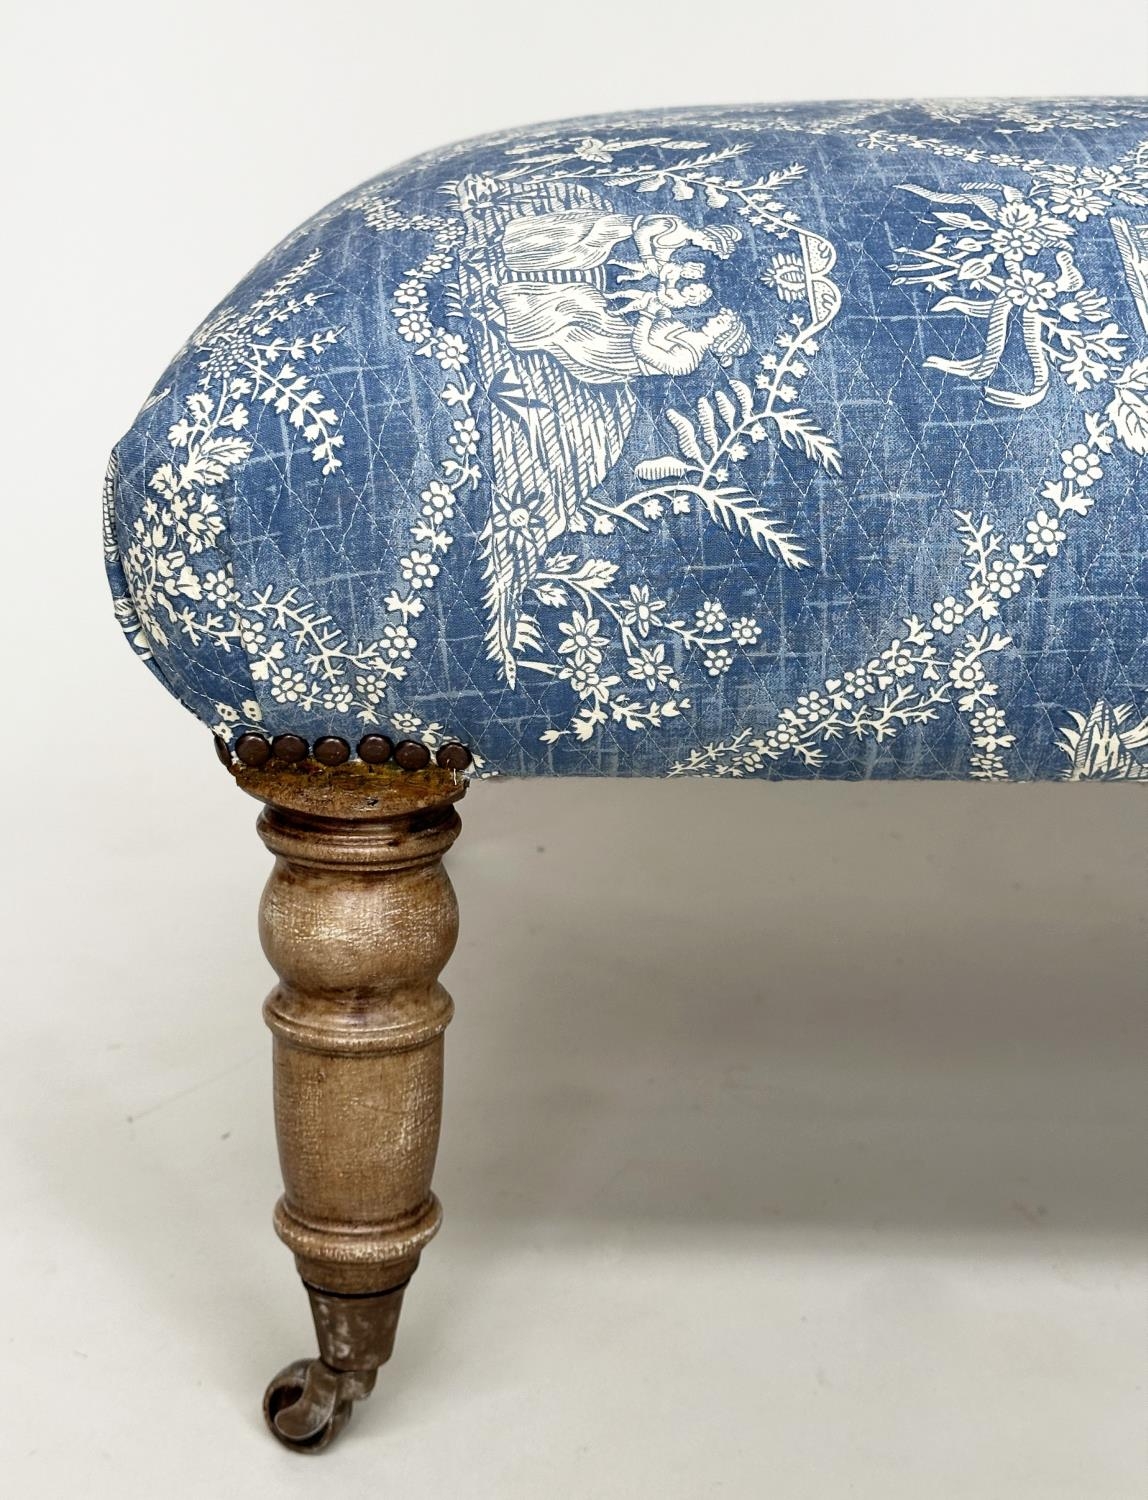 HEARTH STOOL, rectangular Pierre Frey toile de jouy upholstered with limed oak tapering supports, - Image 9 of 11